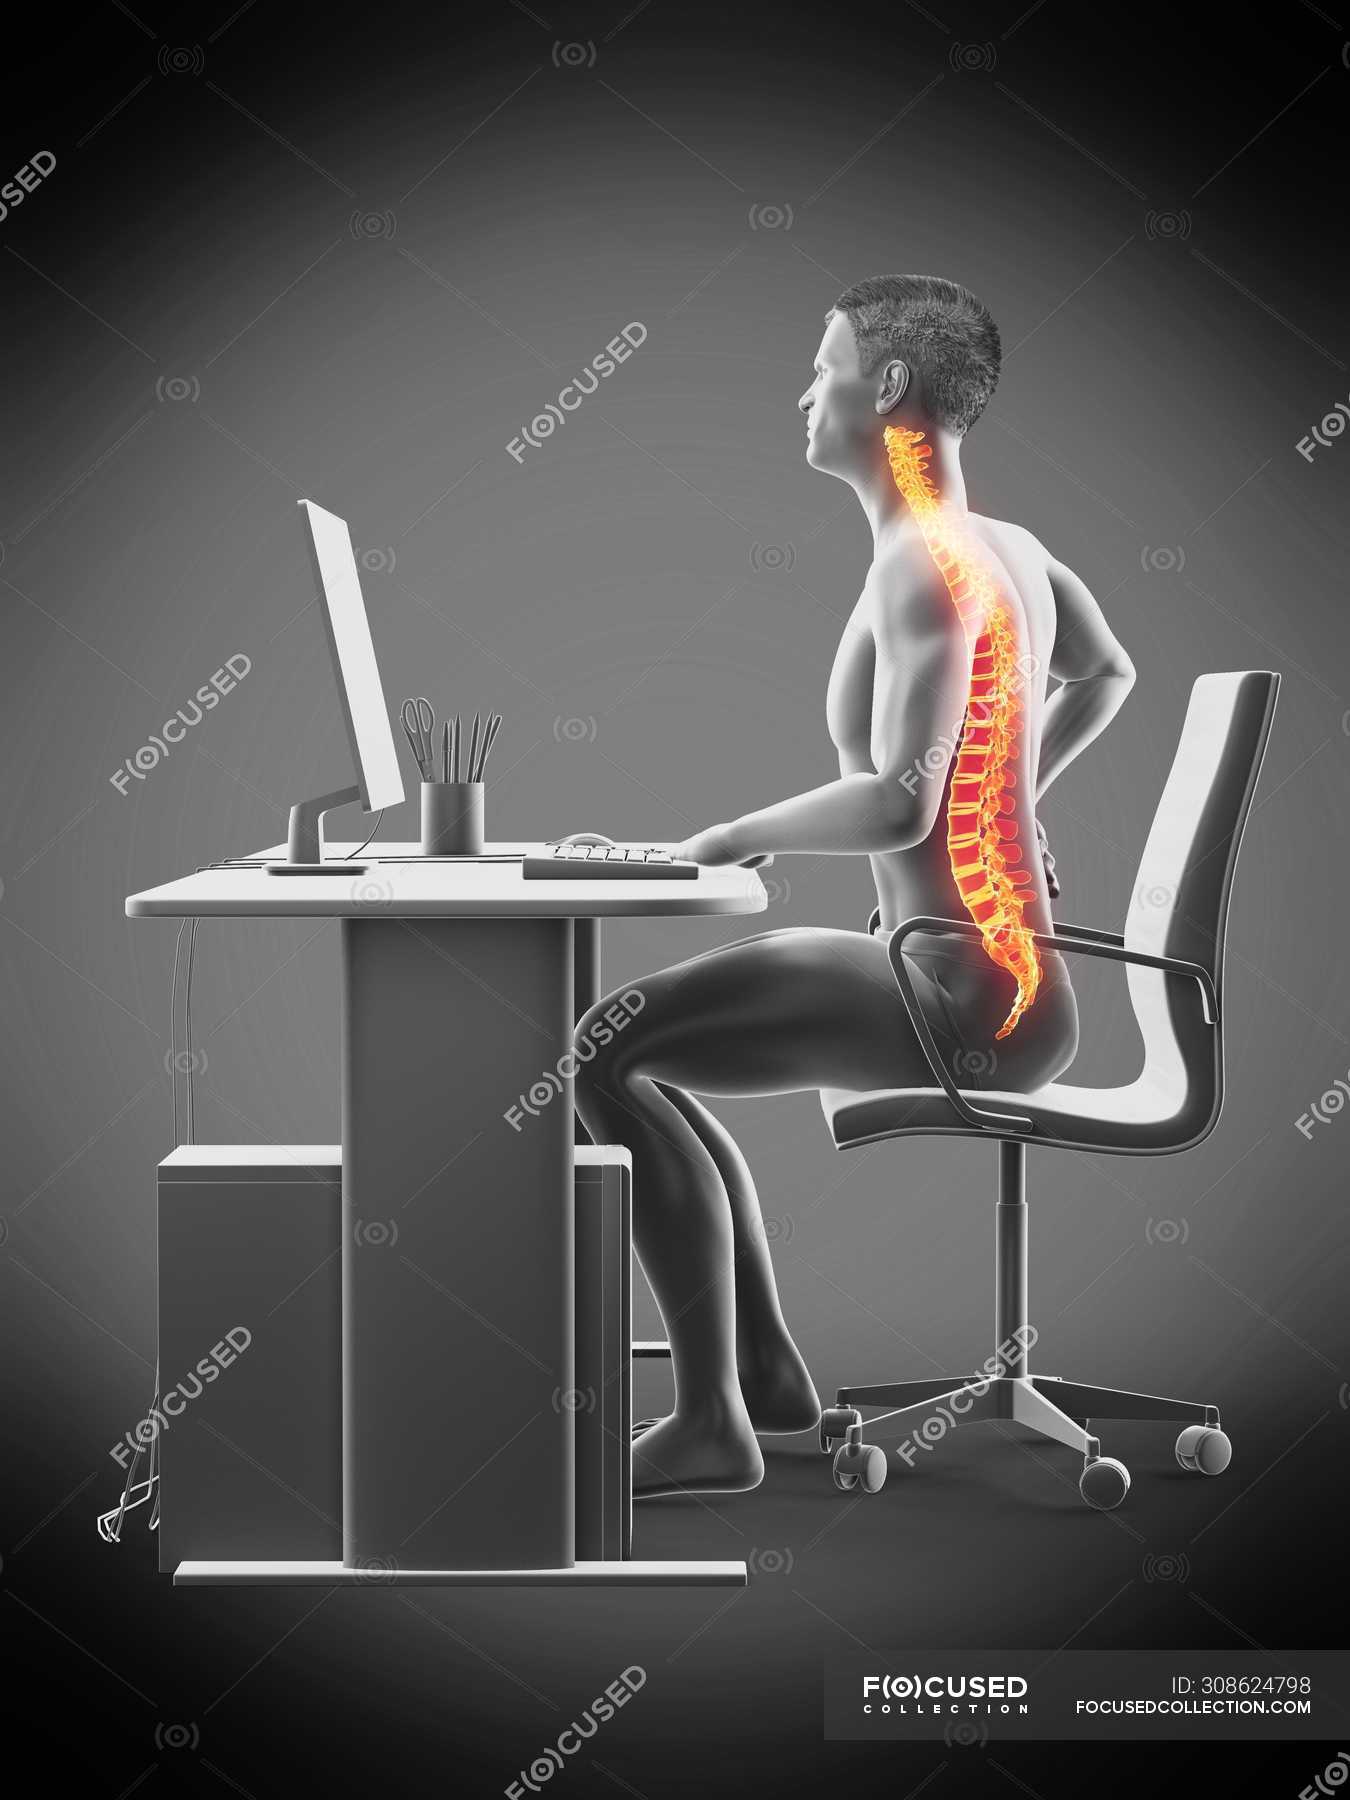 Male office worker with back pain, conceptual illustration. — chair, spine  - Stock Photo | #308624798